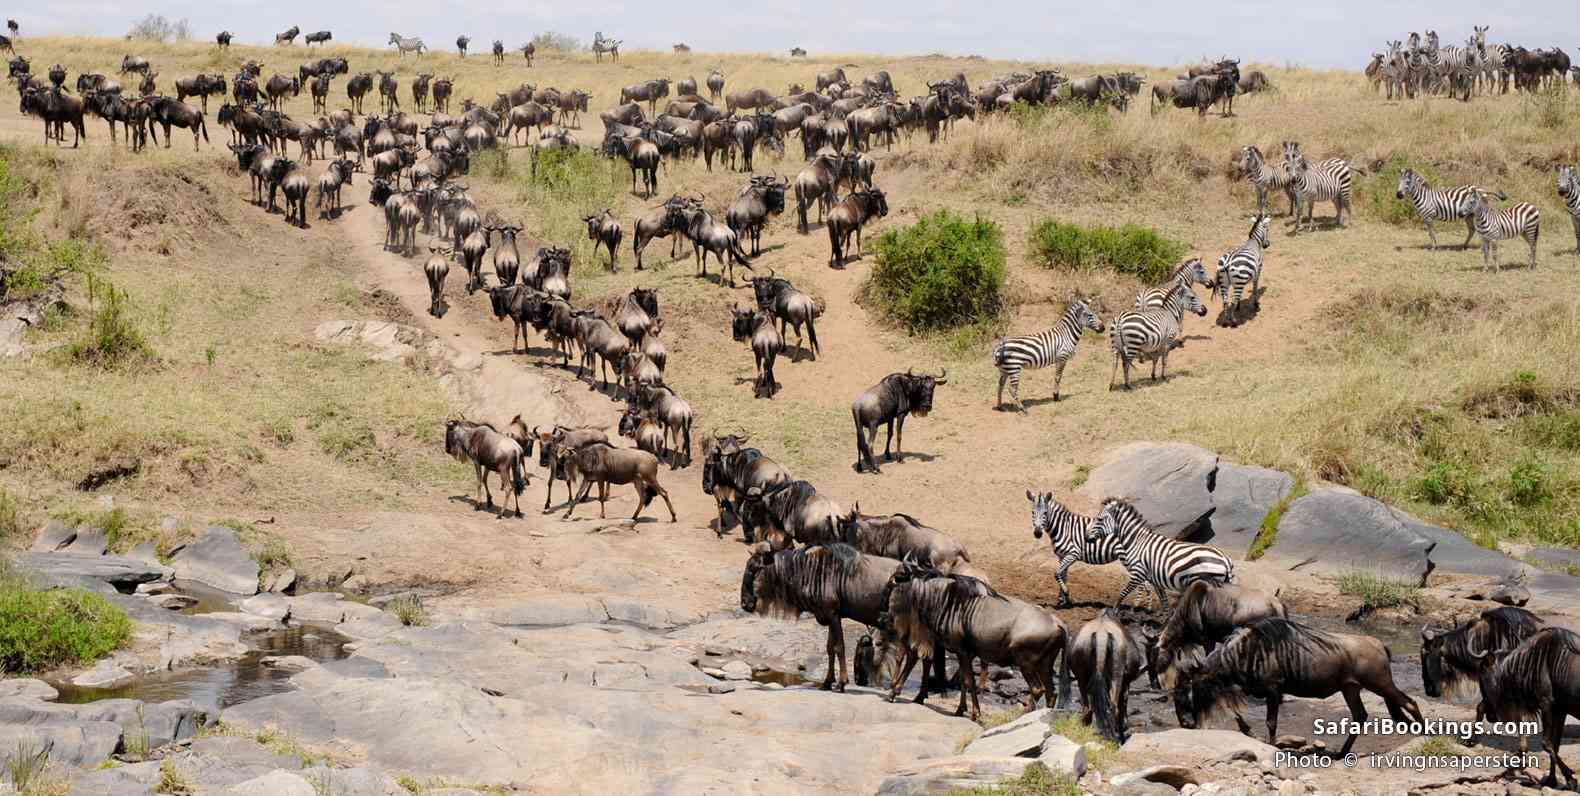 Great Migration of the Wildebeest, heading out looking for water